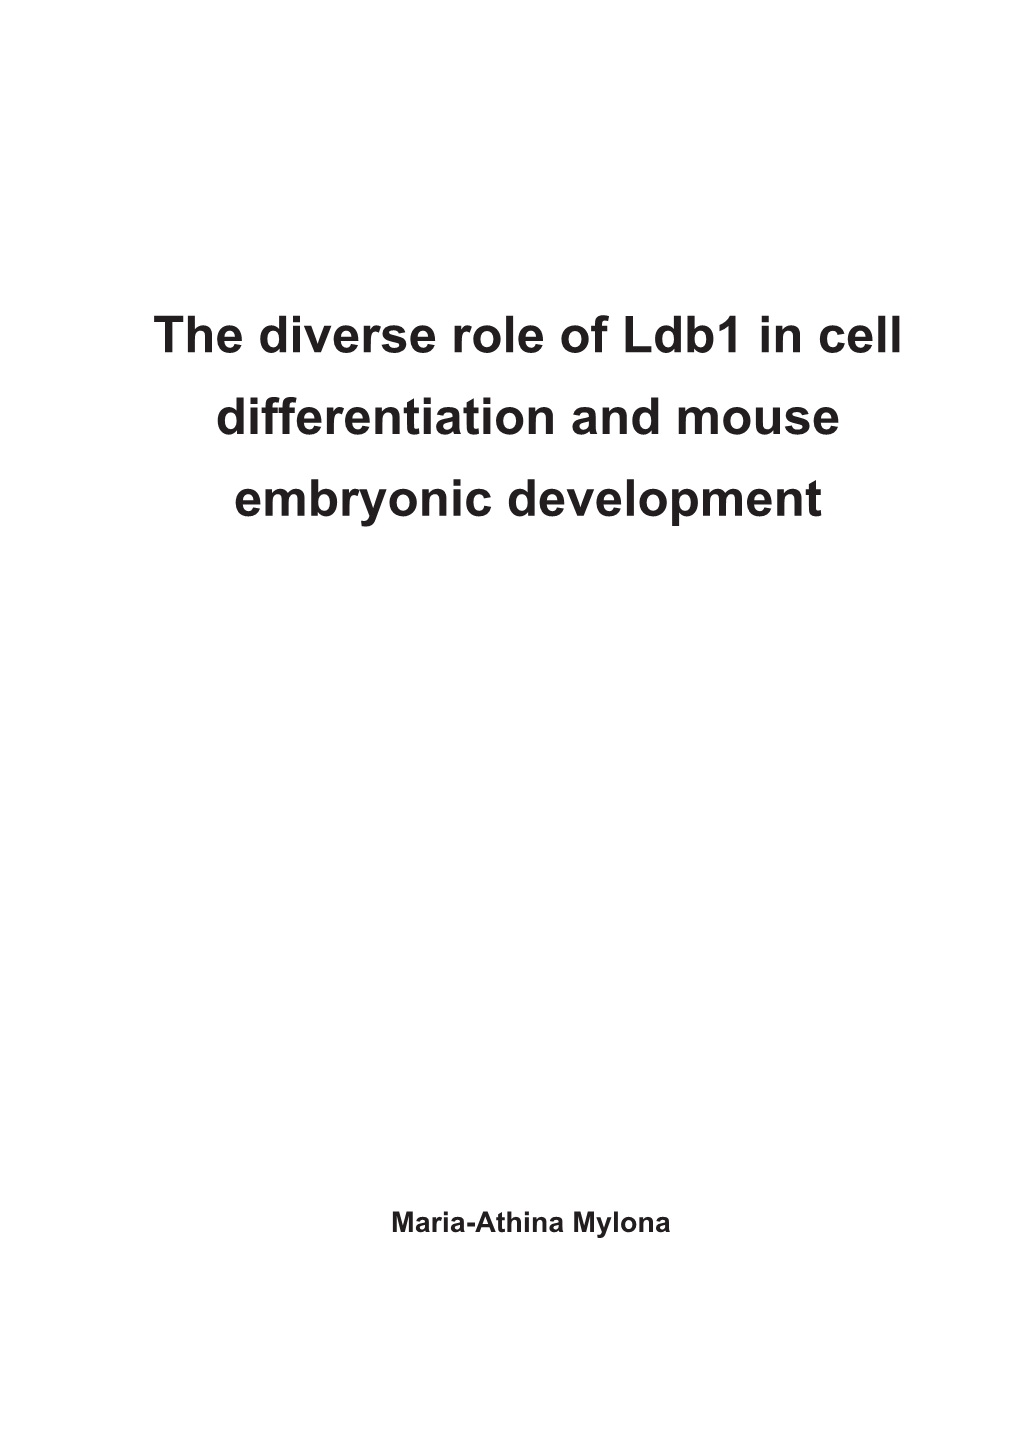 The Diverse Role of Ldb1 in Cell Differentiation and Mouse Embryonic Development